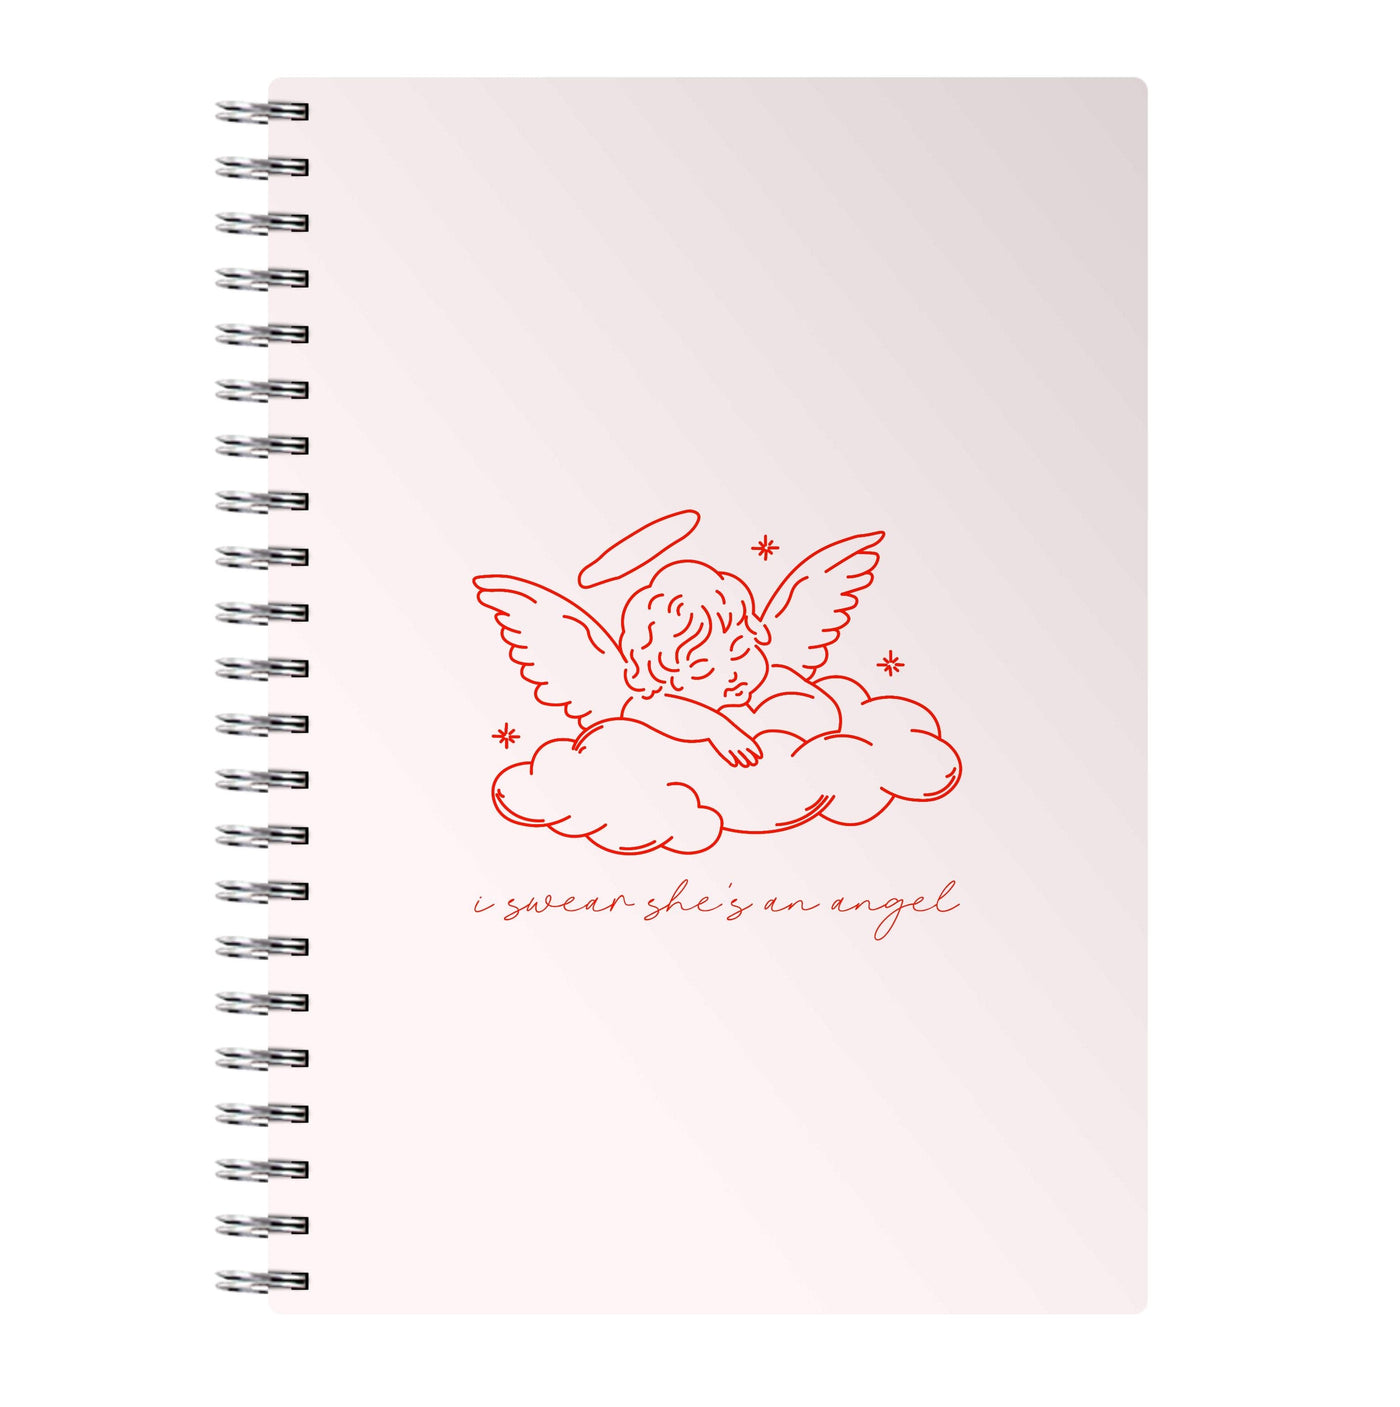 I Swear Shes An Angel - Clean Girl Aesthetic Notebook